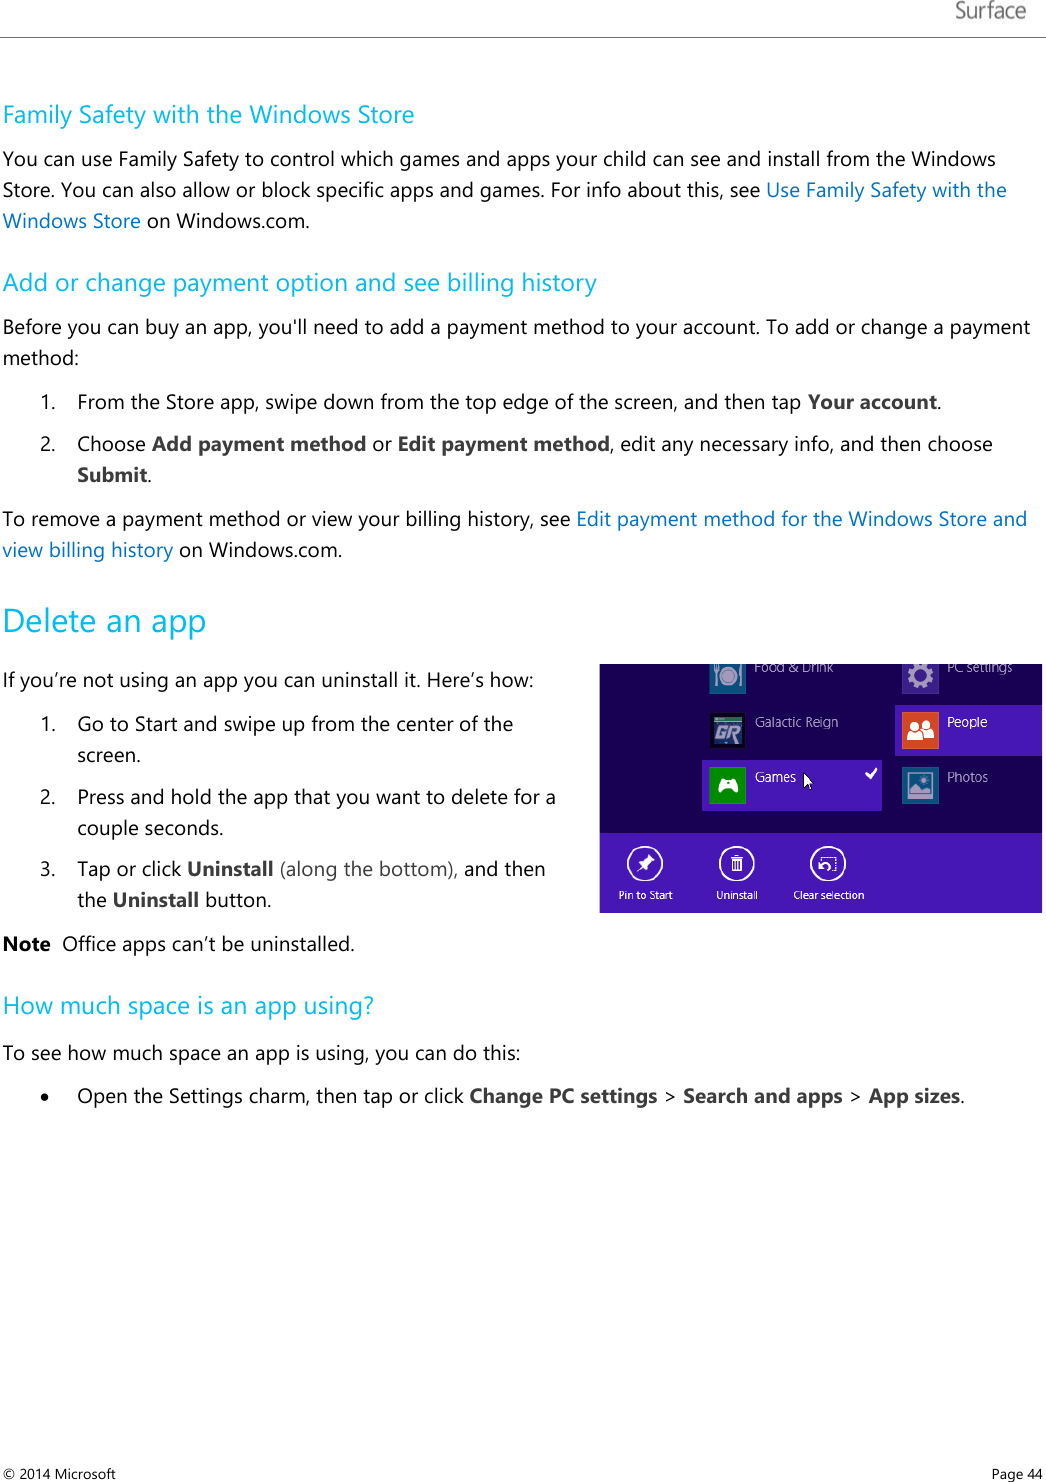   Family Safety with the Windows Store You can use Family Safety to control which games and apps your child can see and install from the Windows Store. You can also allow or block specific apps and games. For info about this, see Use Family Safety with the Windows Store on Windows.com. Add or change payment option and see billing history Before you can buy an app, you&apos;ll need to add a payment method to your account. To add or change a payment method: 1. From the Store app, swipe down from the top edge of the screen, and then tap Your account. 2. Choose Add payment method or Edit payment method, edit any necessary info, and then choose Submit. To remove a payment method or view your billing history, see Edit payment method for the Windows Store and view billing history on Windows.com. Delete an app If you’re not using an app you can uninstall it. Here’s how: 1. Go to Start and swipe up from the center of the screen.  2. Press and hold the app that you want to delete for a couple seconds. 3. Tap or click Uninstall (along the bottom), and then the Uninstall button.  Note  Office apps can’t be uninstalled.  How much space is an app using? To see how much space an app is using, you can do this: • Open the Settings charm, then tap or click Change PC settings &gt; Search and apps &gt; App sizes.   © 2014 Microsoft     Page 44  